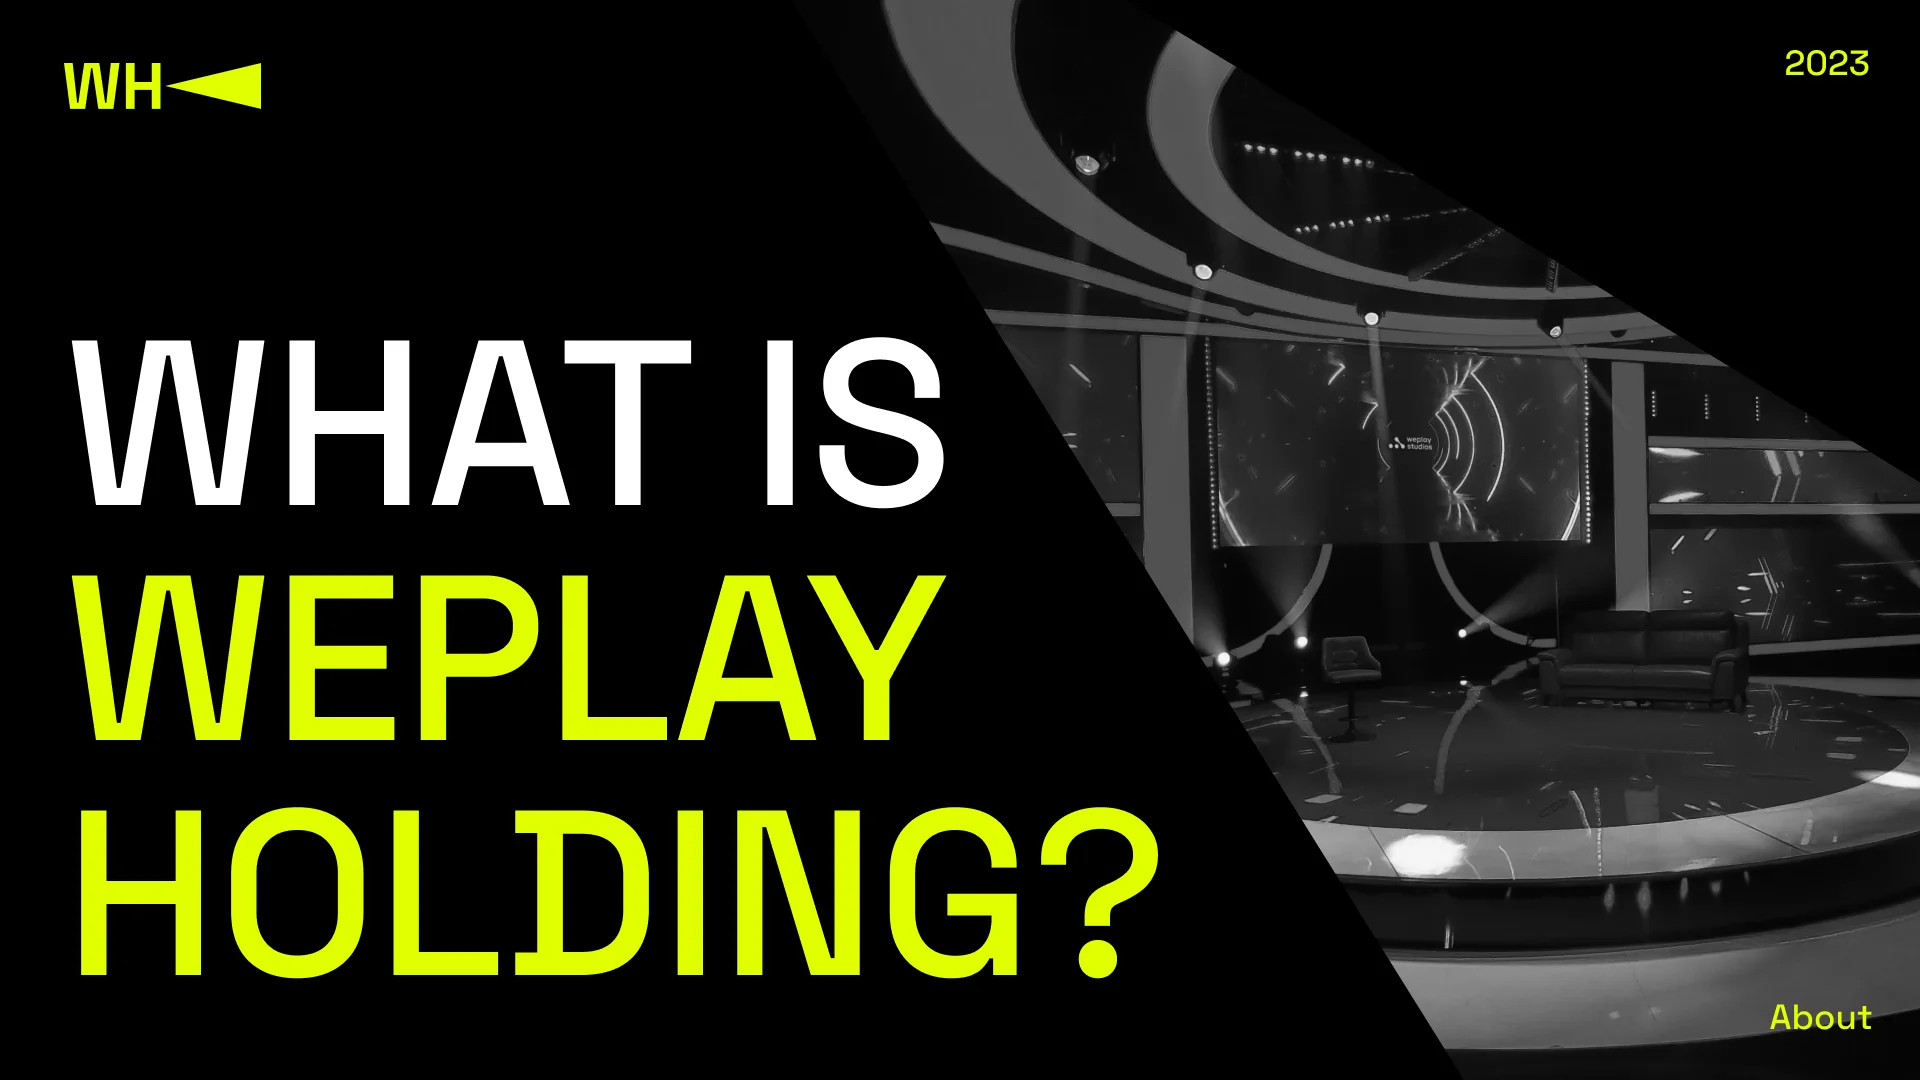 What is WePlay Holding?